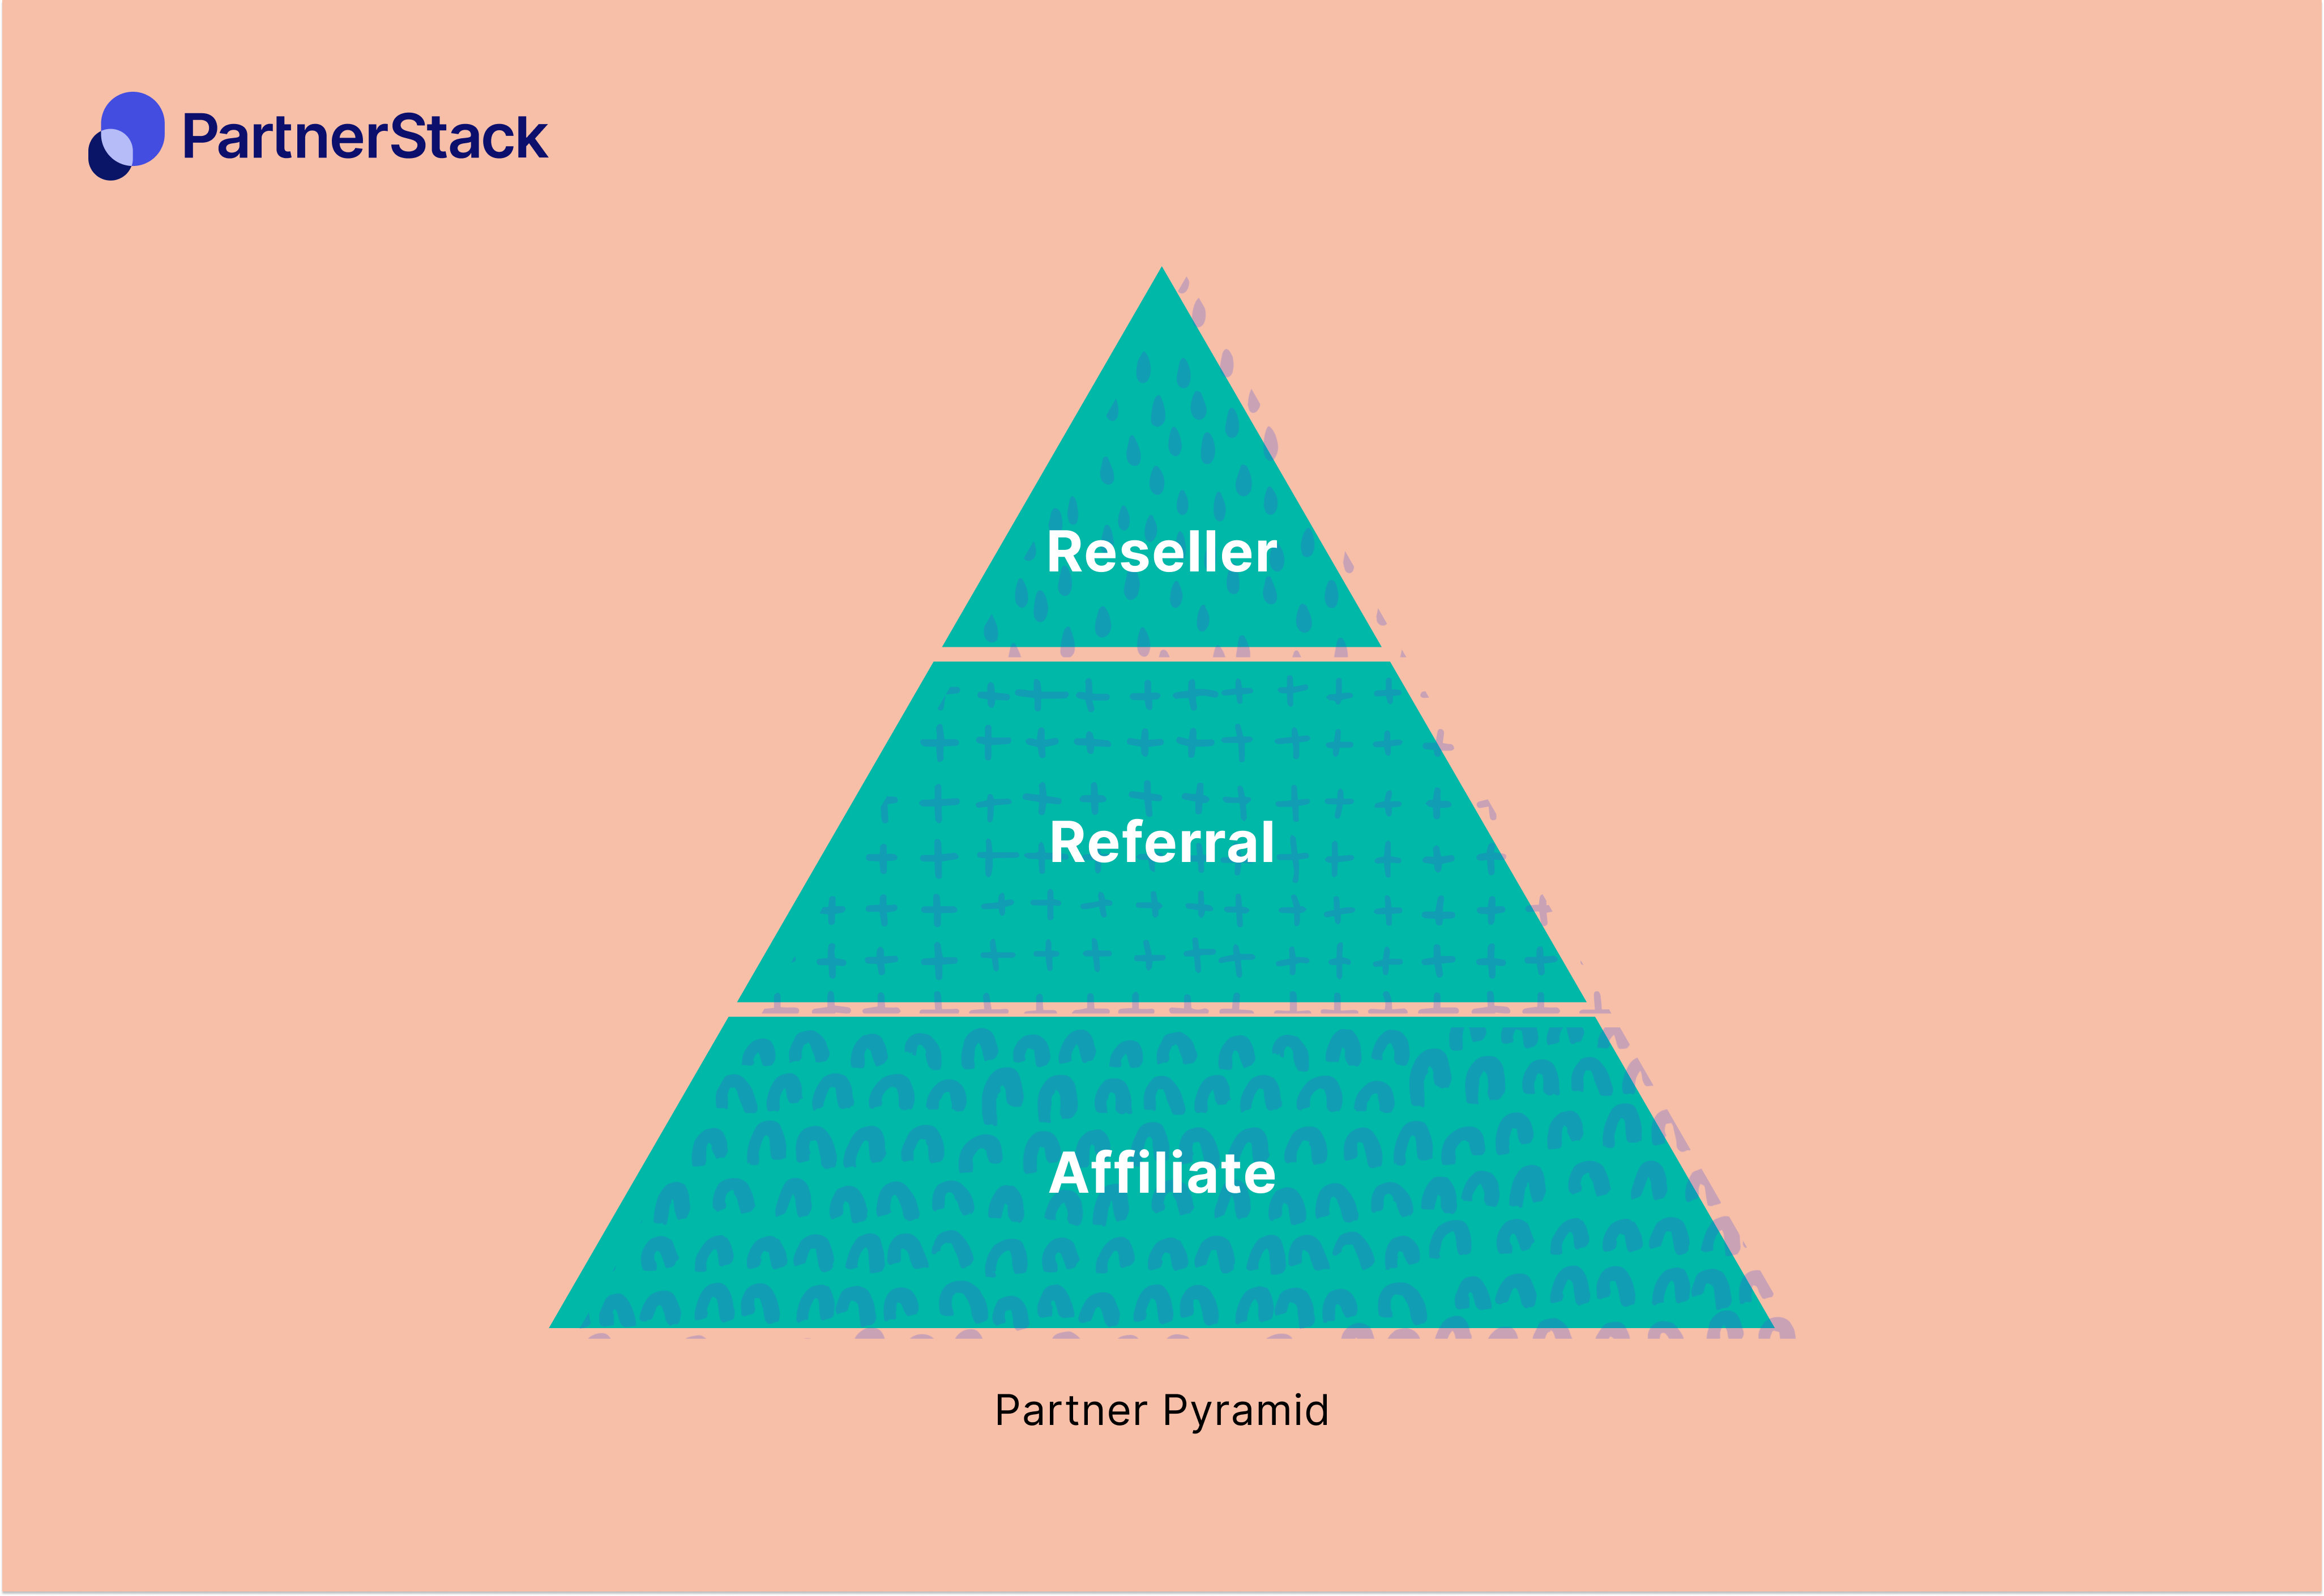 partnerstack partner pyramid with affiliate, referral, and reseller partnerships